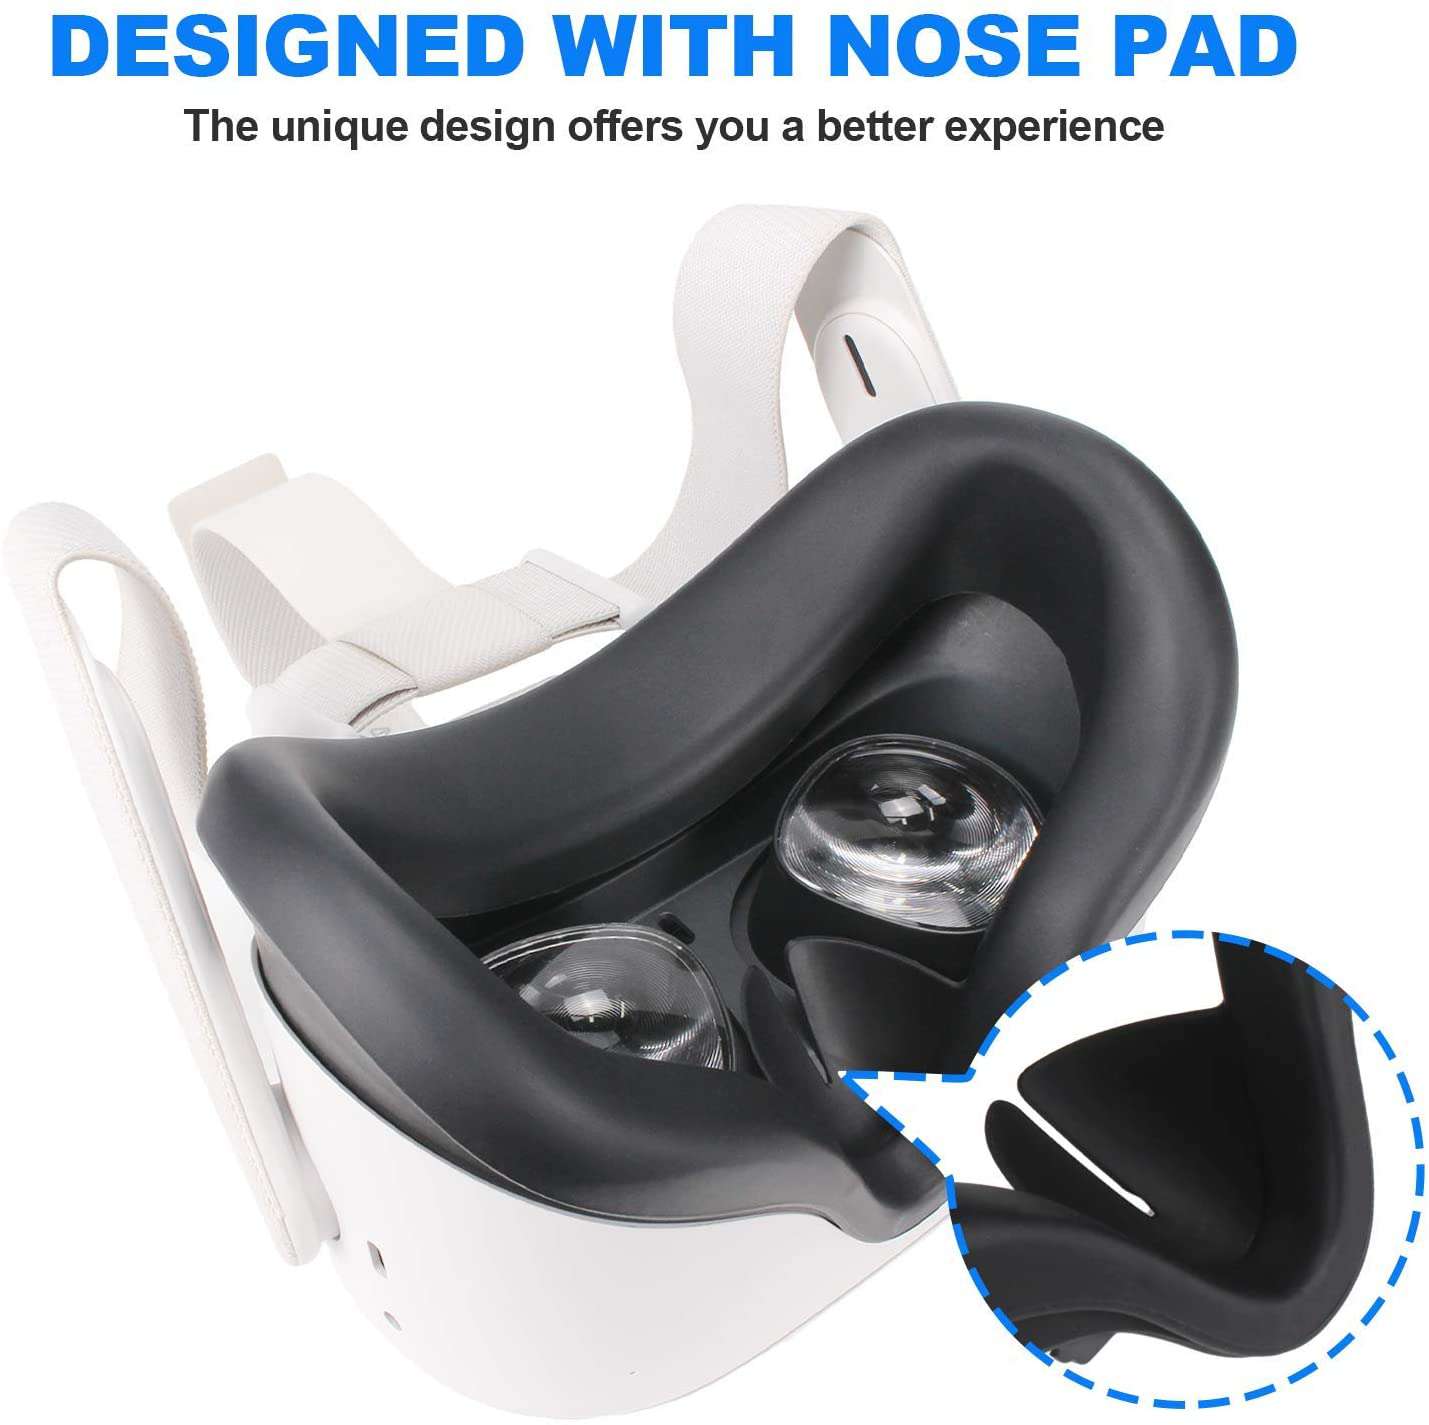 Mask with nose pad design prevents slipping and discomfort during use.